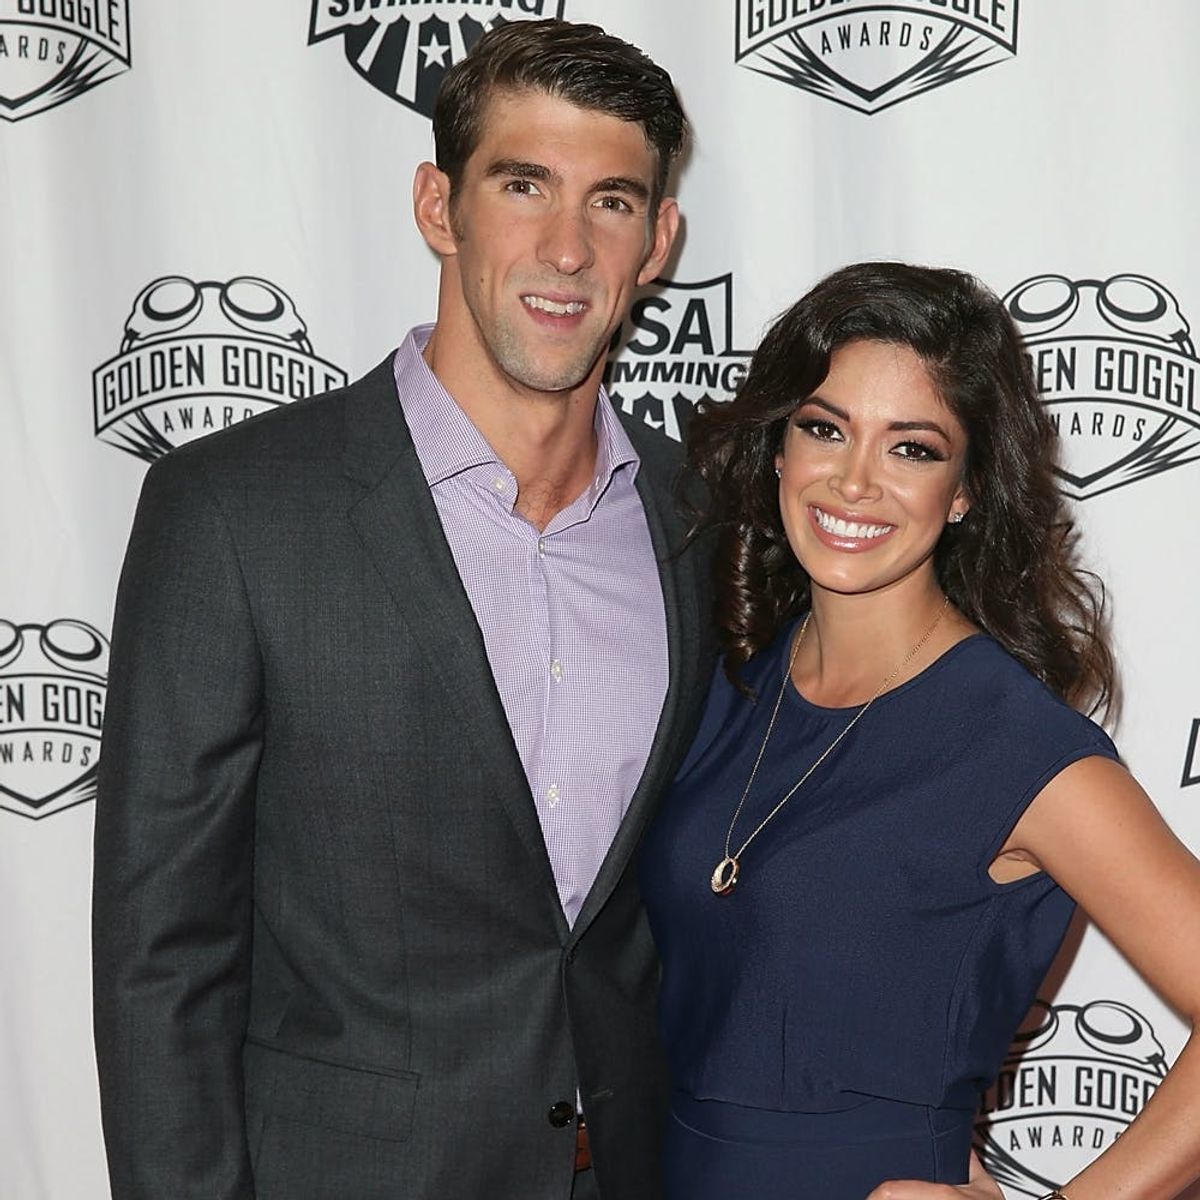 Michael Phelps’ Post-Olympic Wedding Plans Will Make You Swoon